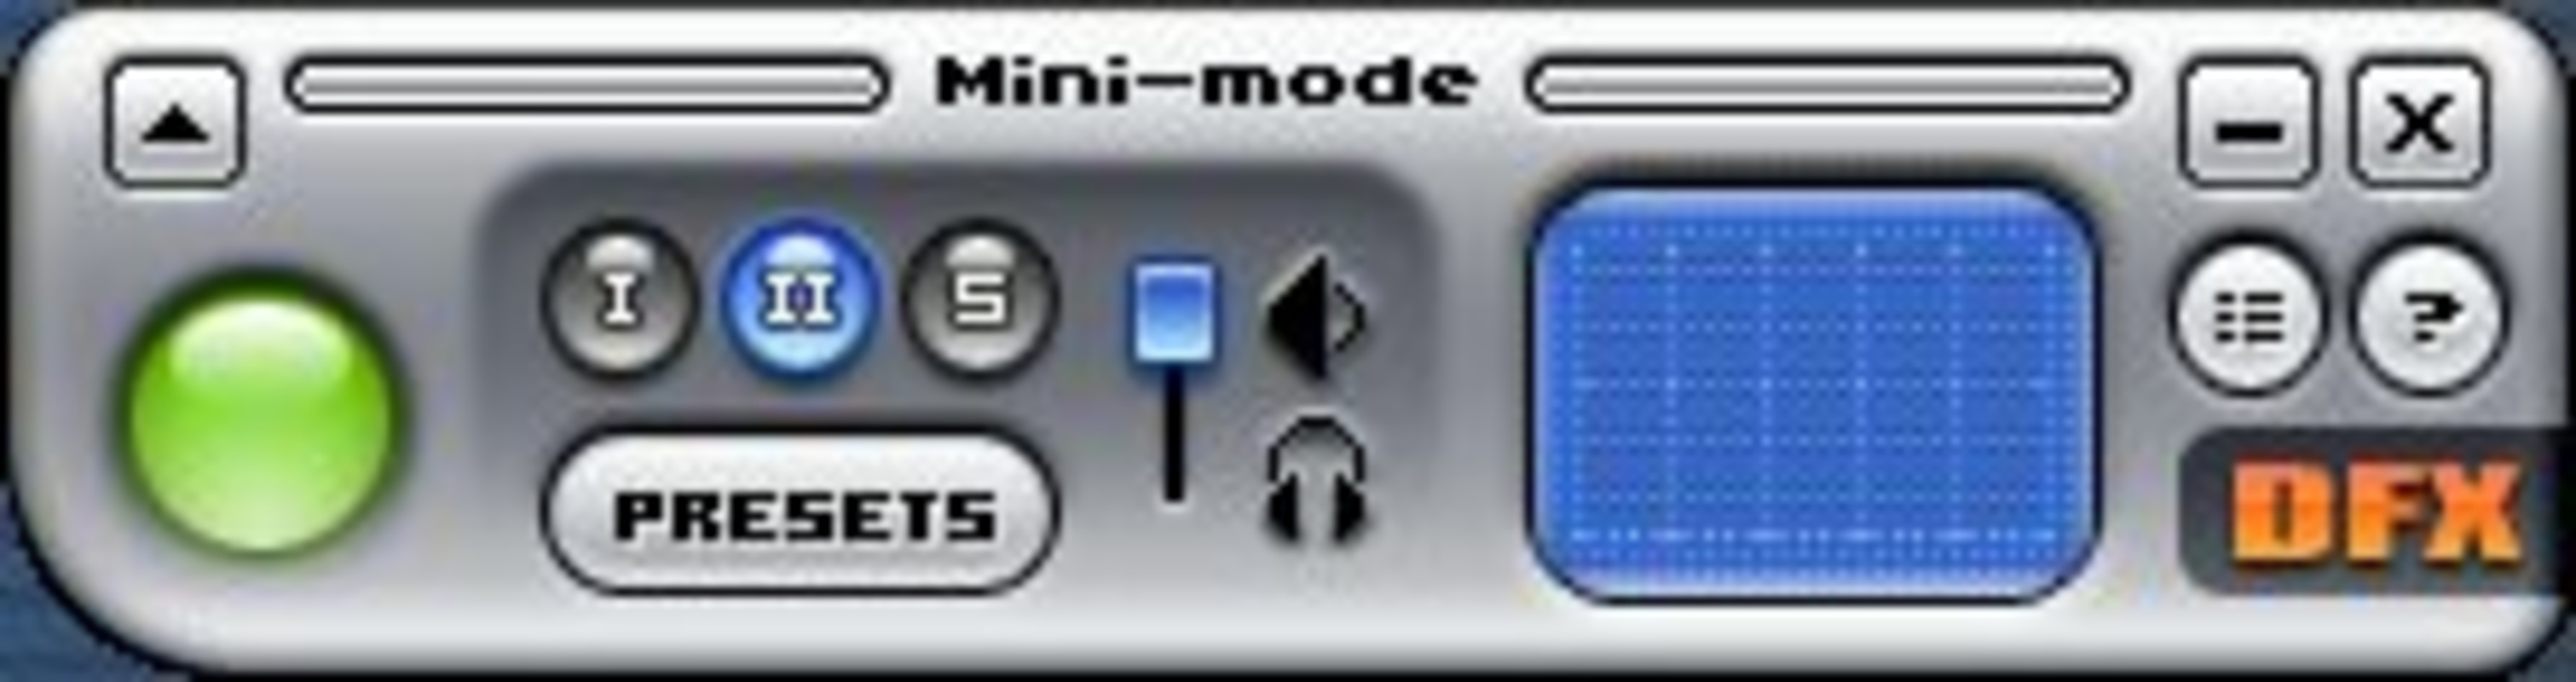 DFX for Winamp 8.40 feature